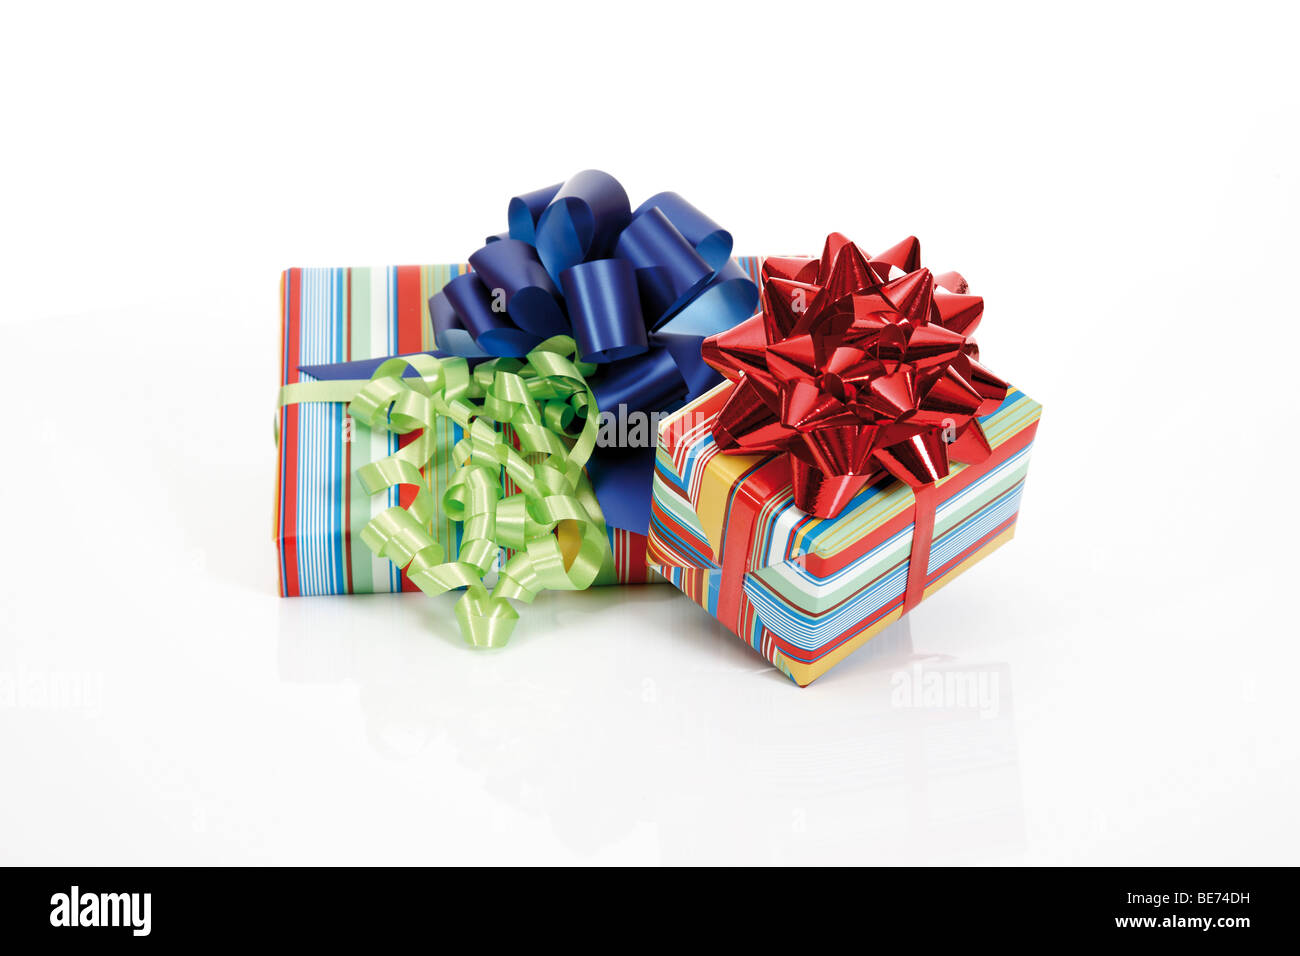 Presents with ribbons Stock Photo